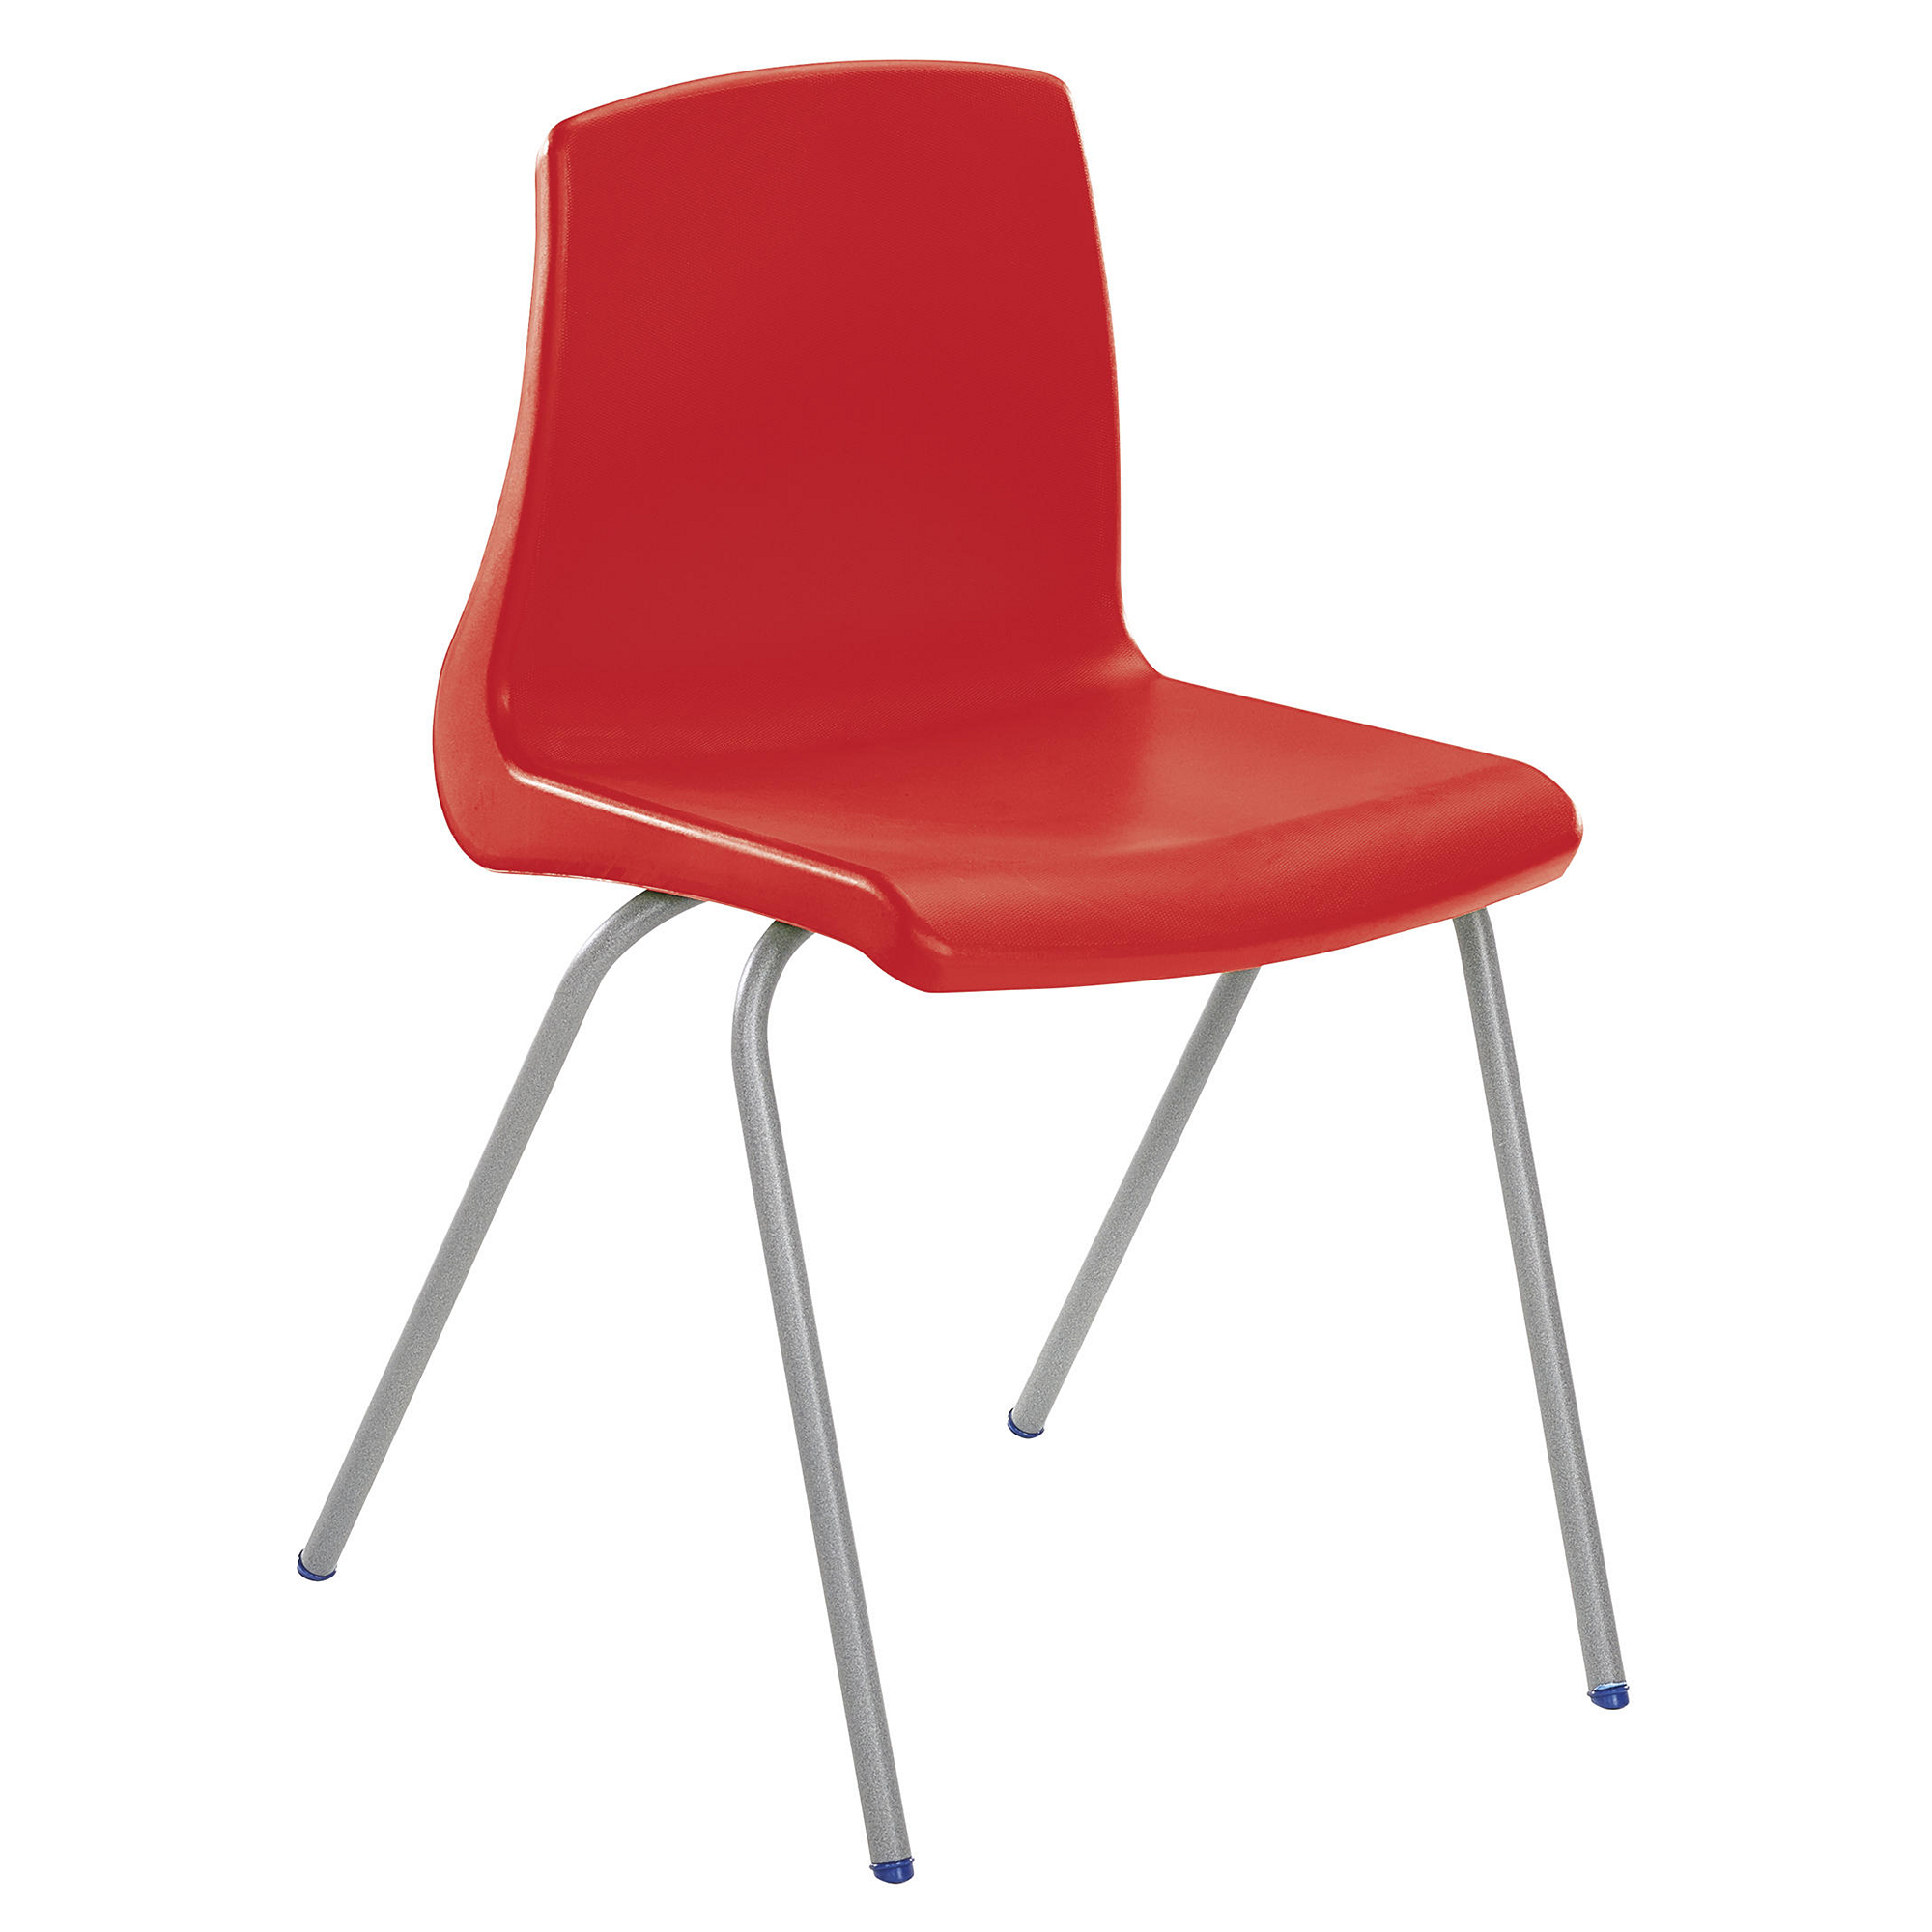 NP Chairs H380mm - Red